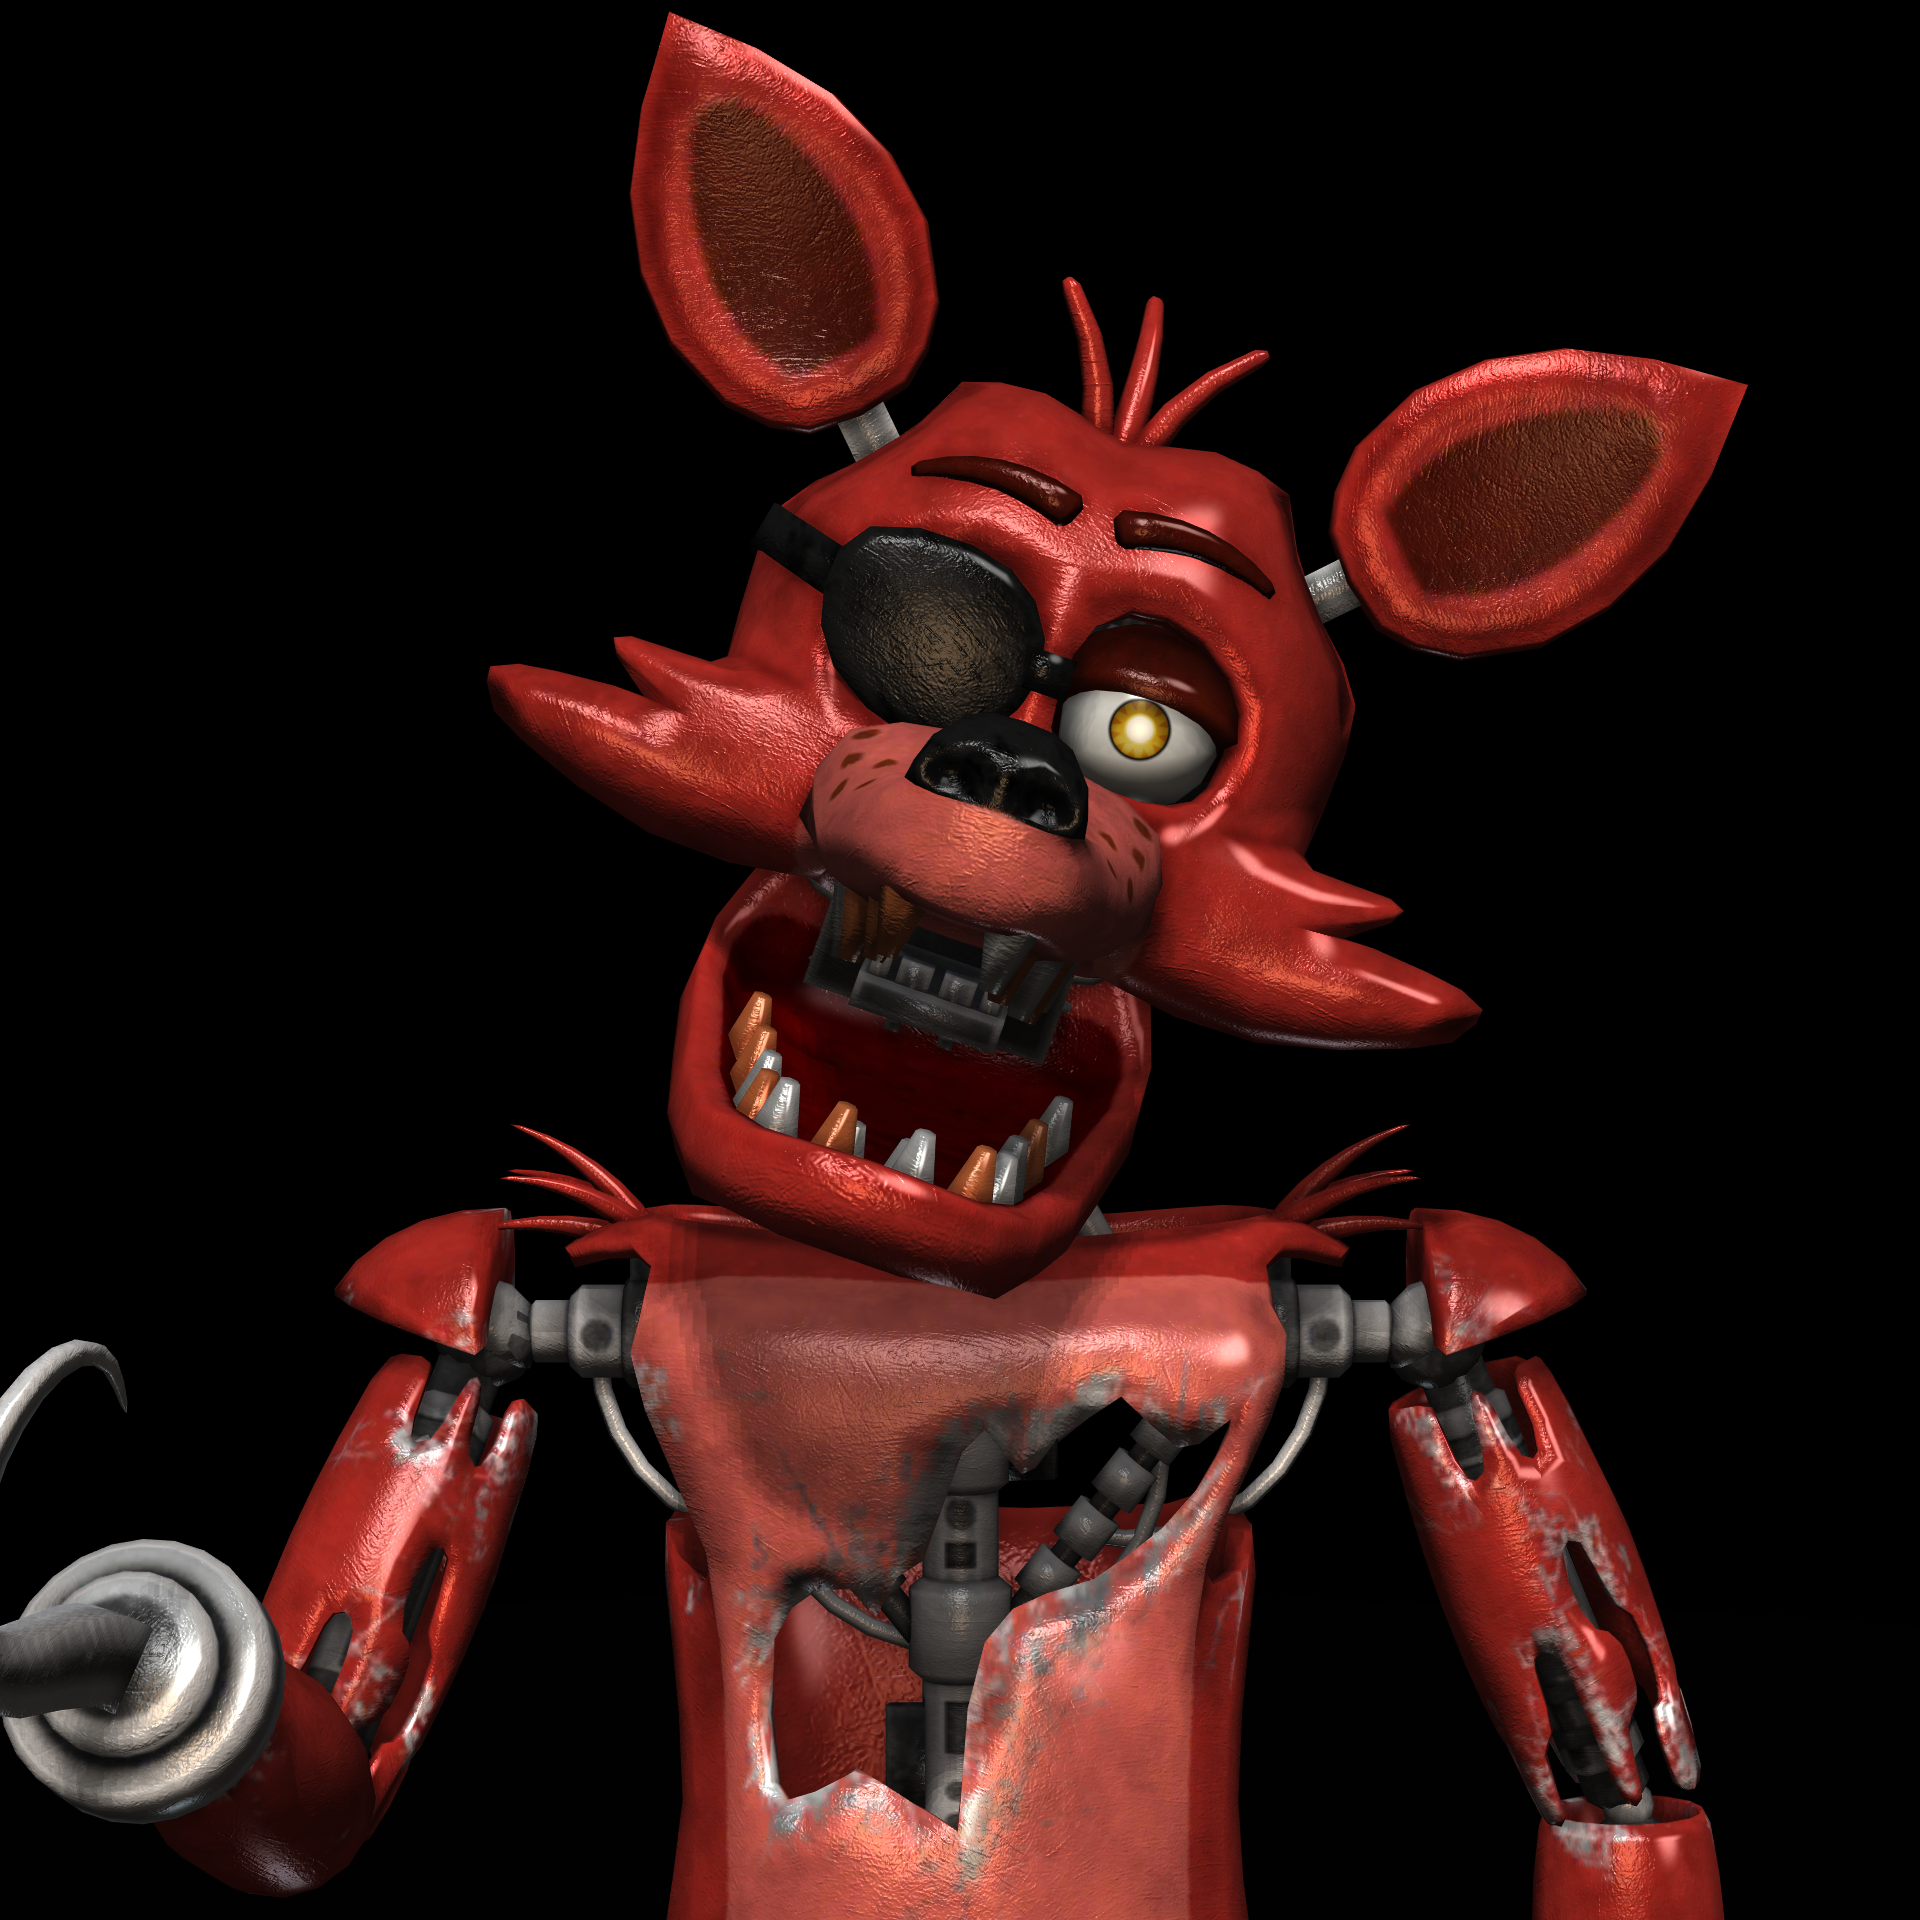 Withered Foxy Jumpscare by Basilisk2002 on DeviantArt